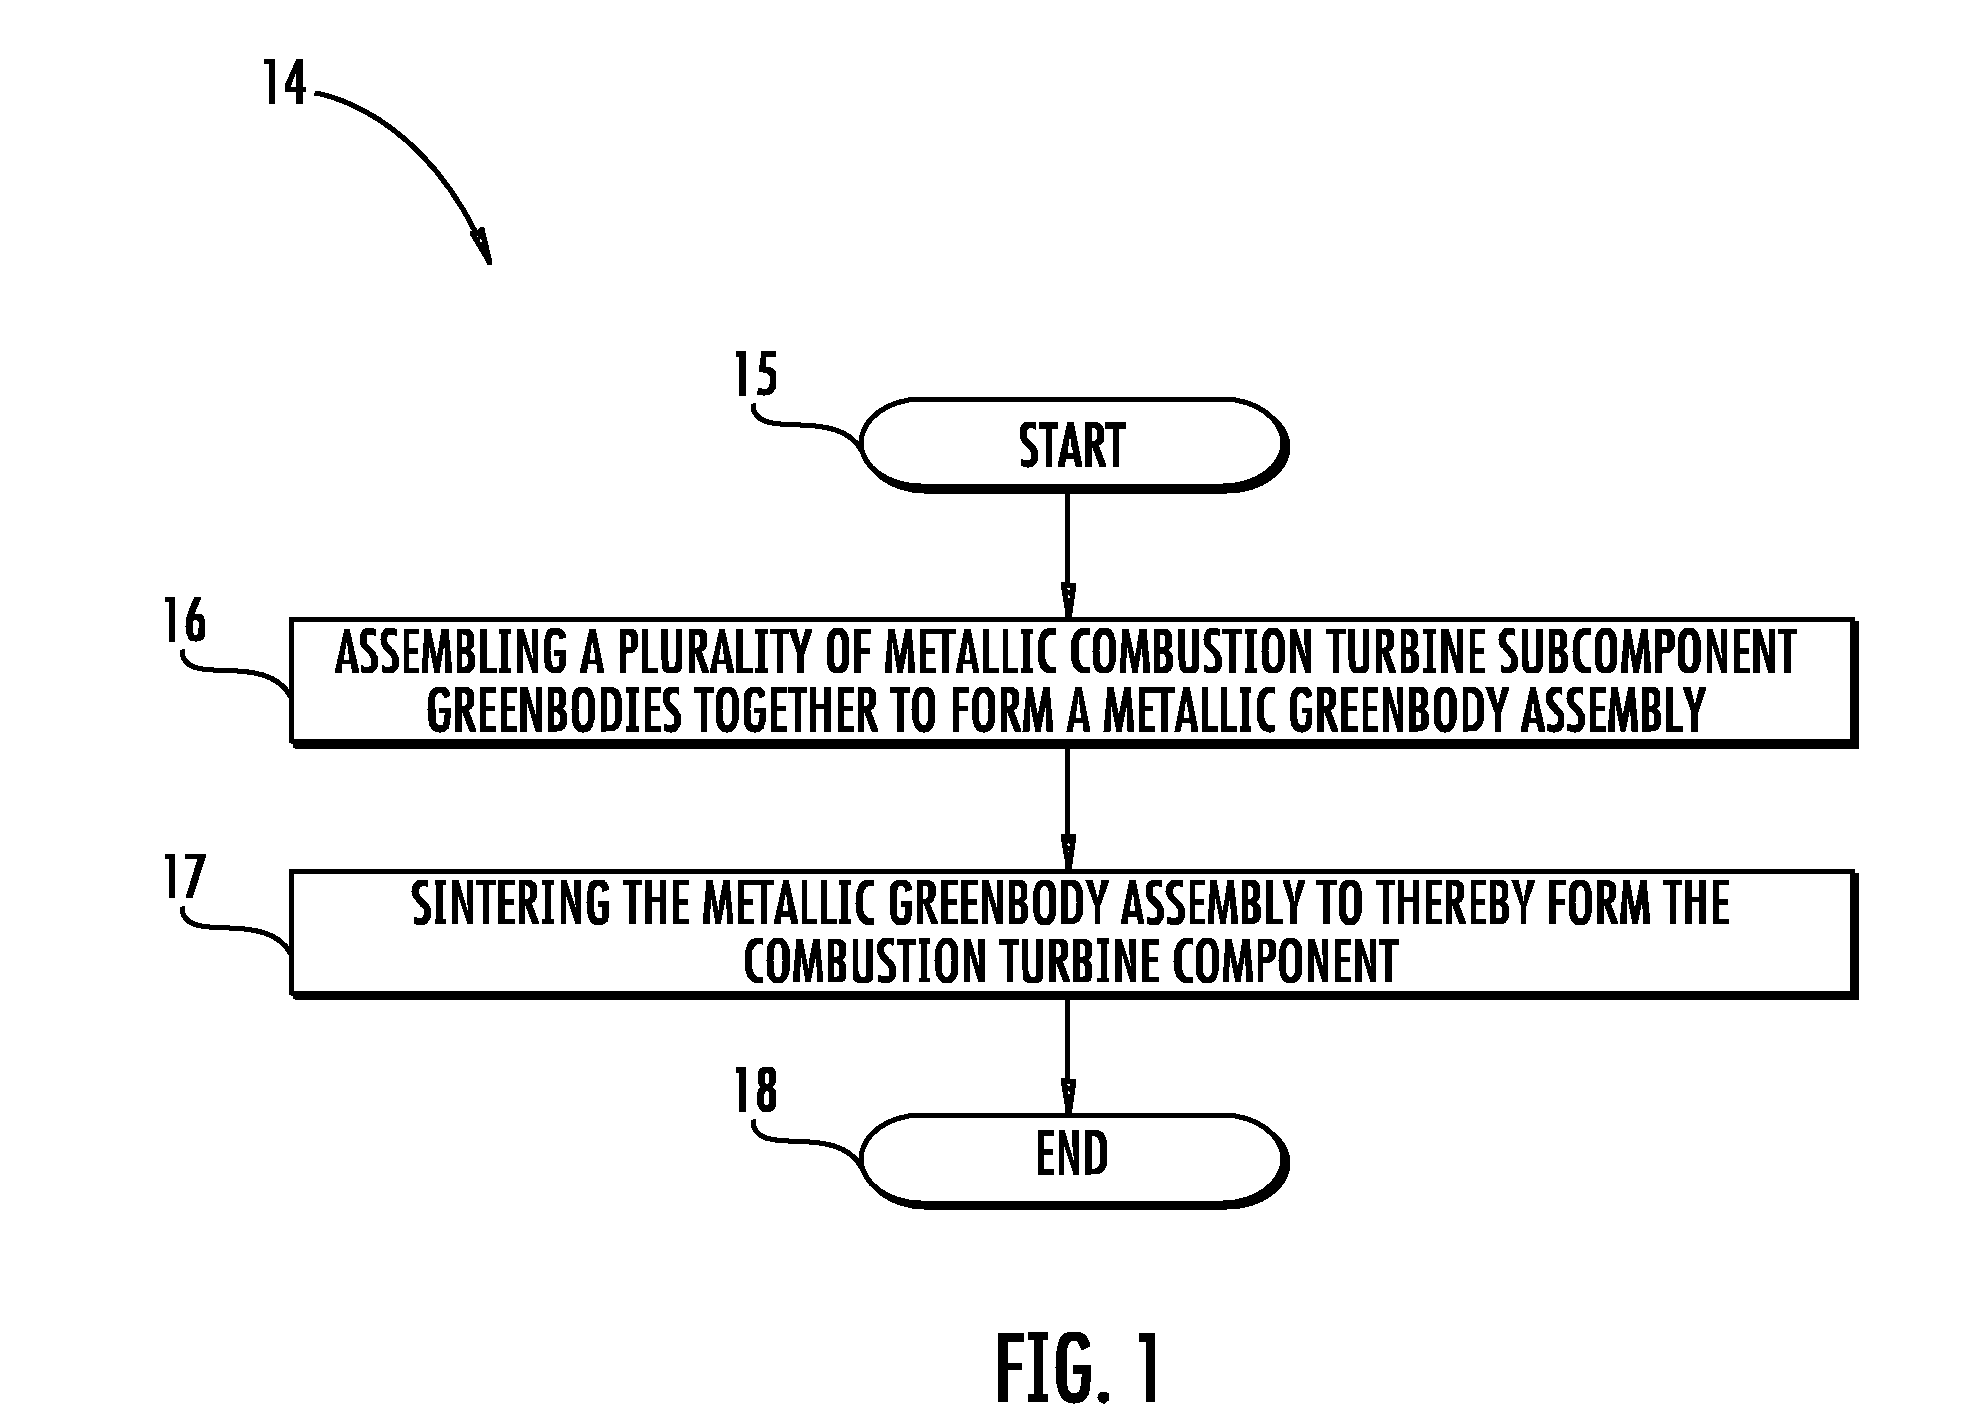 Method of Making a Combustion Turbine Component from Metallic Combustion Turbine Subcomponent Greenbodies